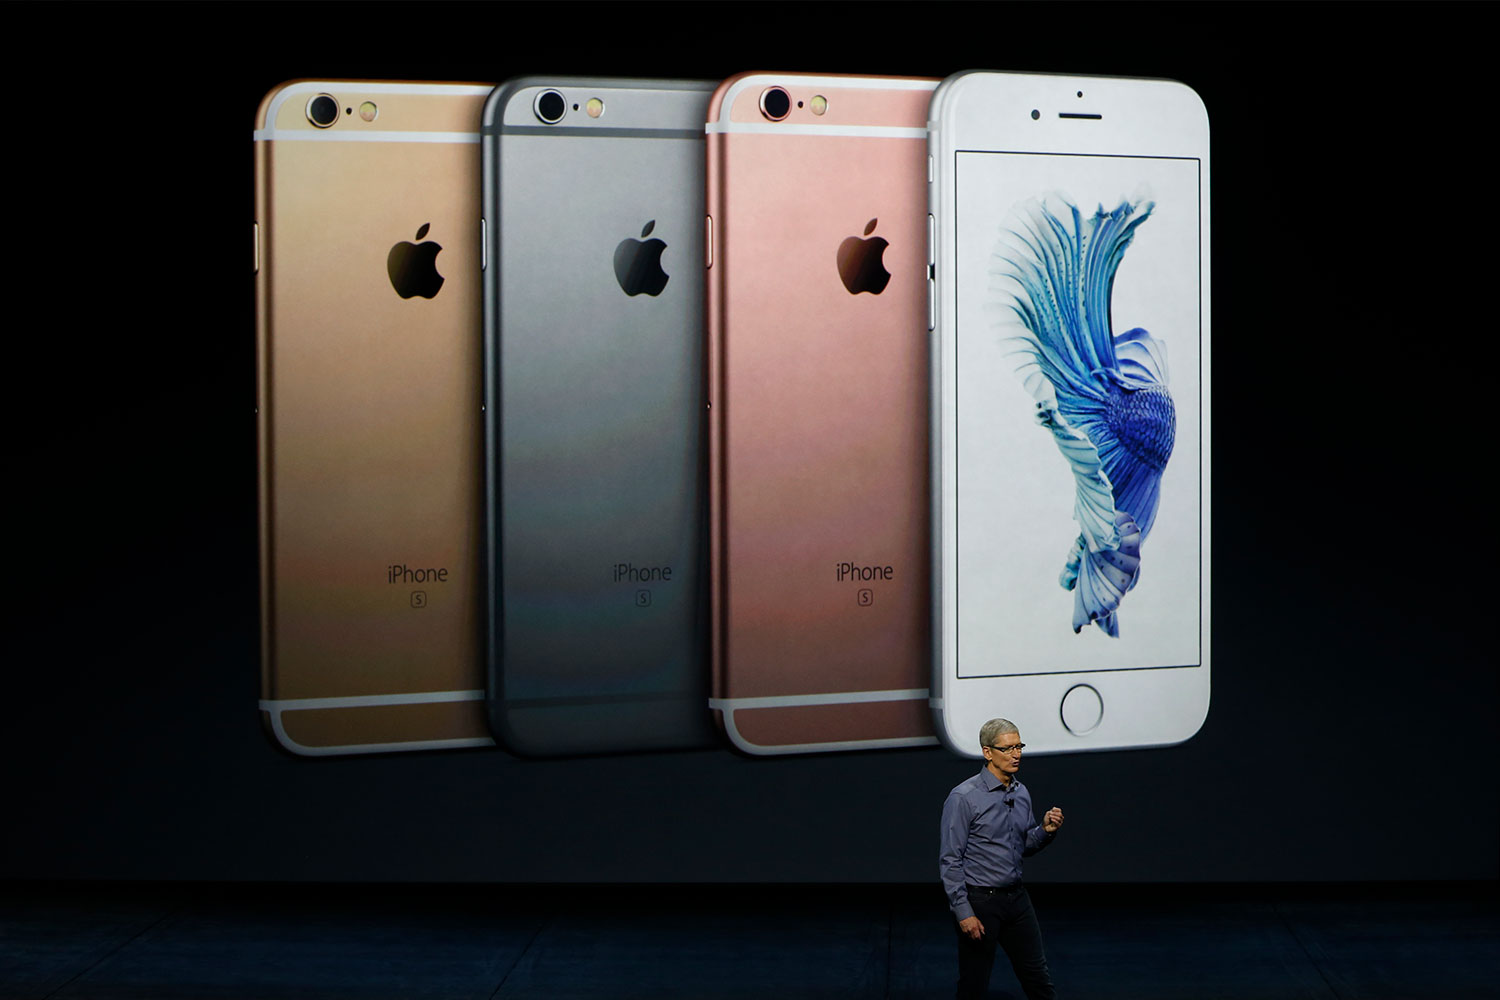 Apple iPhone 6S review: The oldest iPhone can't compete with Apple's newer  models - CNET